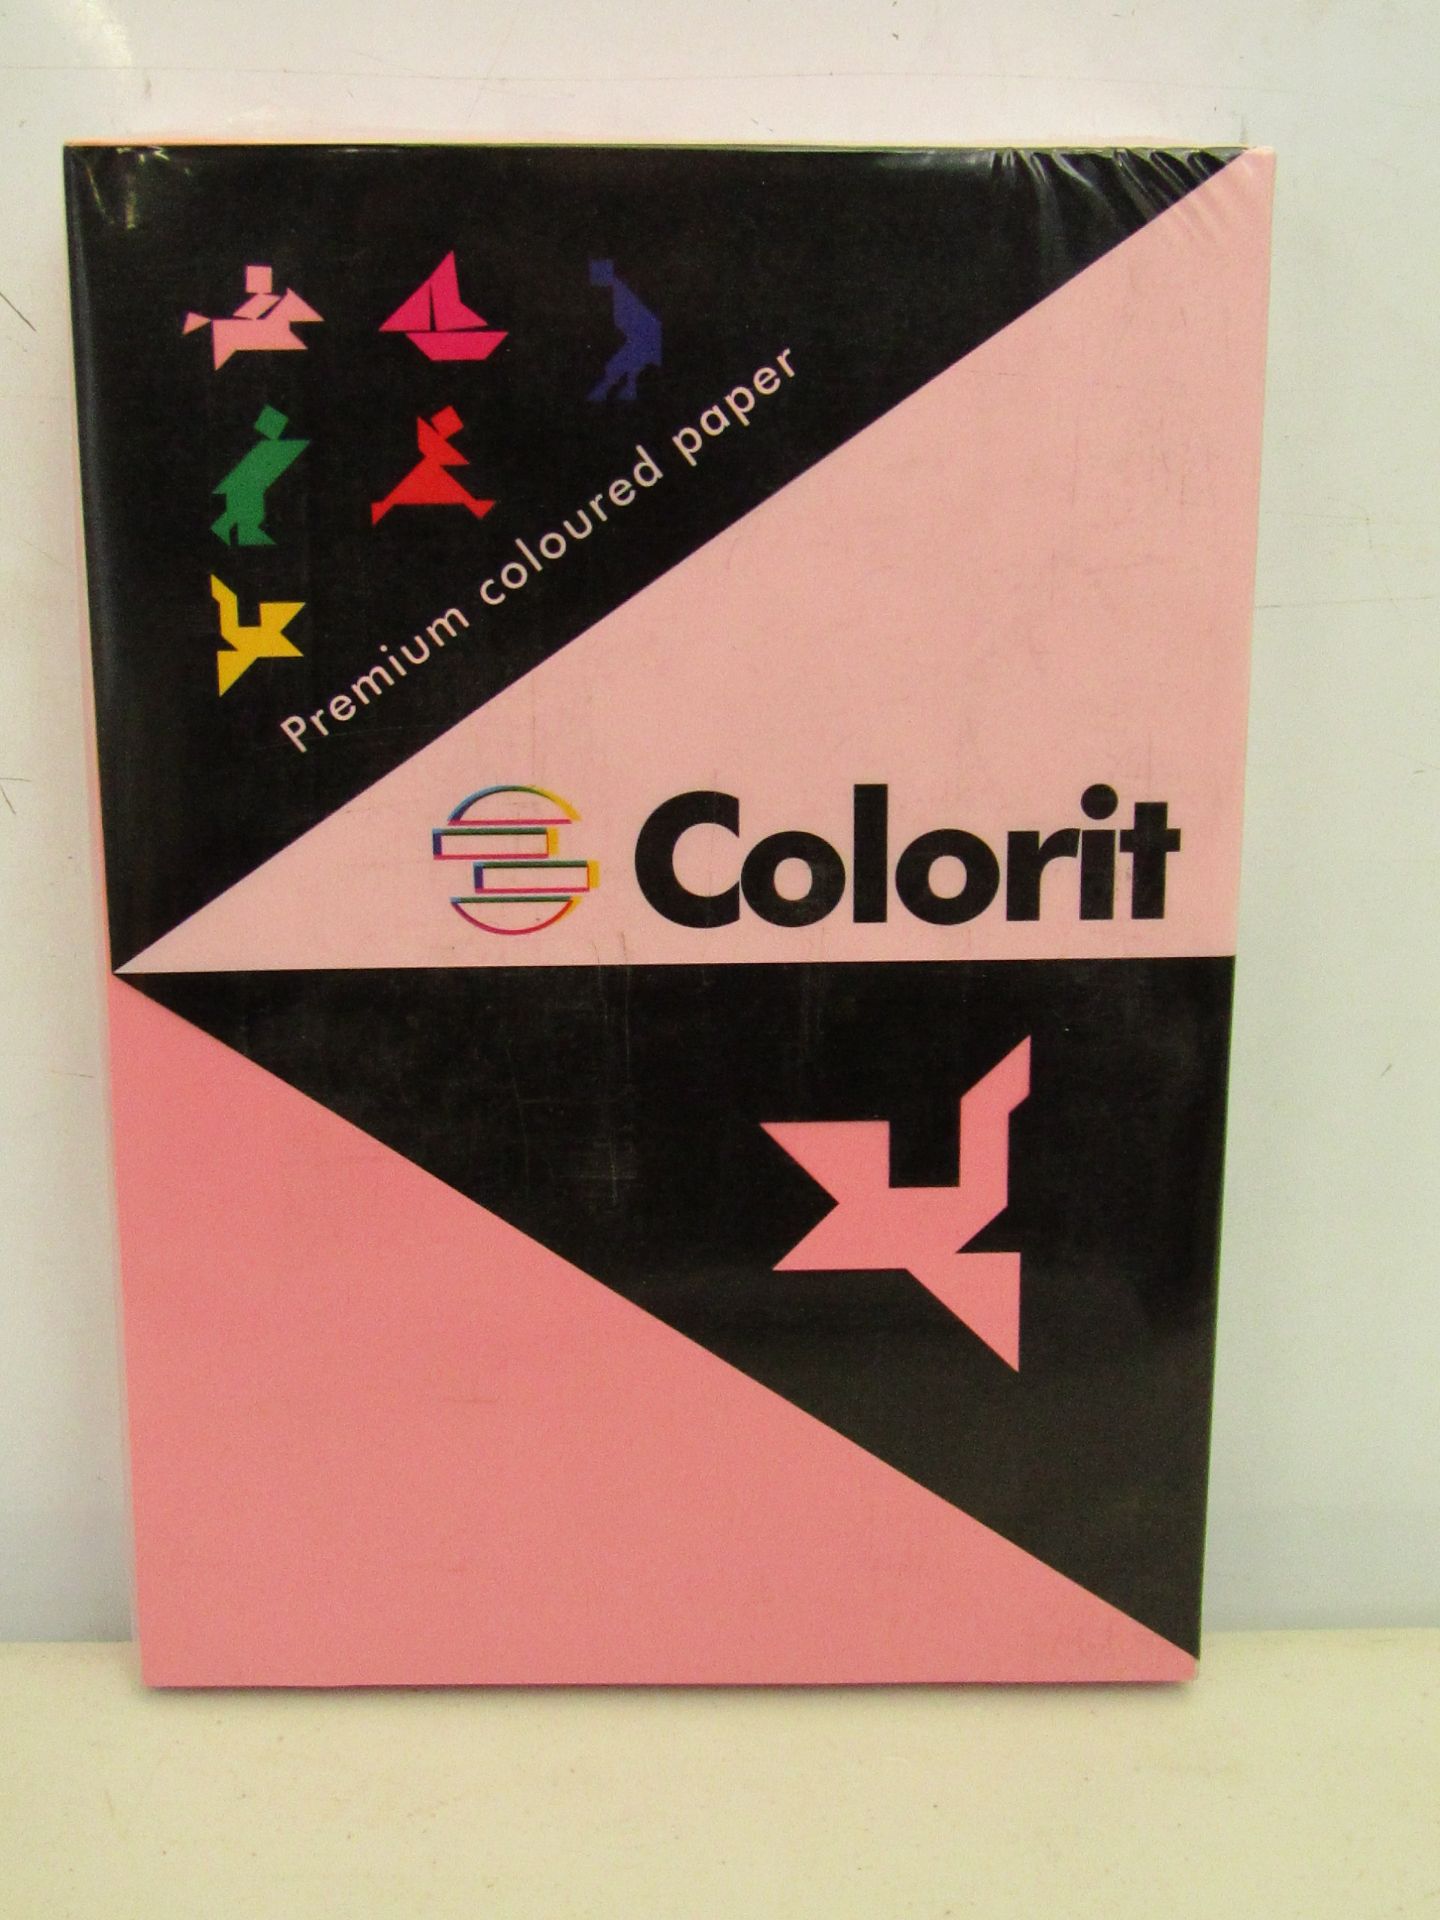 8x packs of Colorit Pink Paper. A4, 210 x 297 mm. 500 sheets per pack. 80g/m².